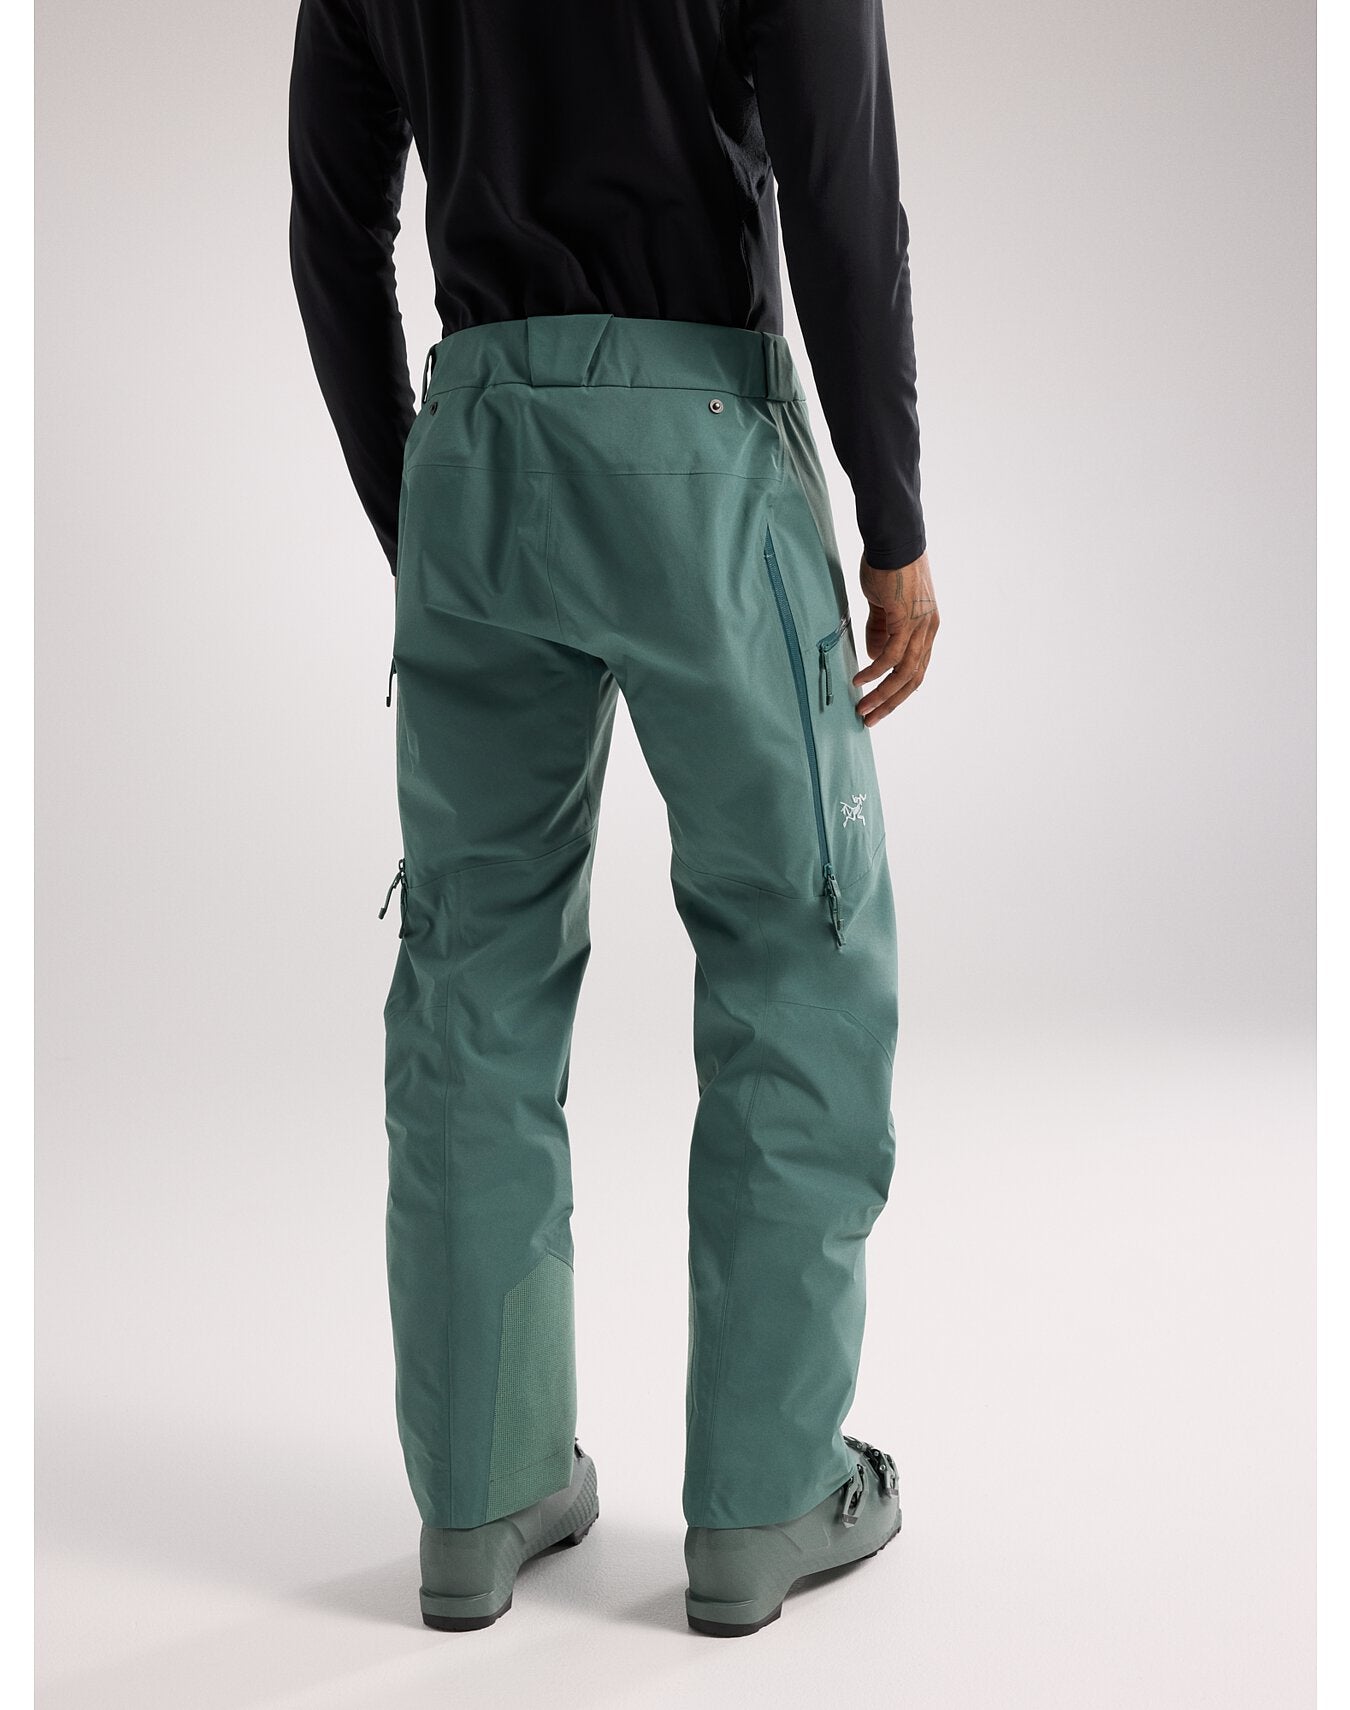 F23-X000007145-Sabre-Insulated-Pant-Boxcar-Back-View.jpg